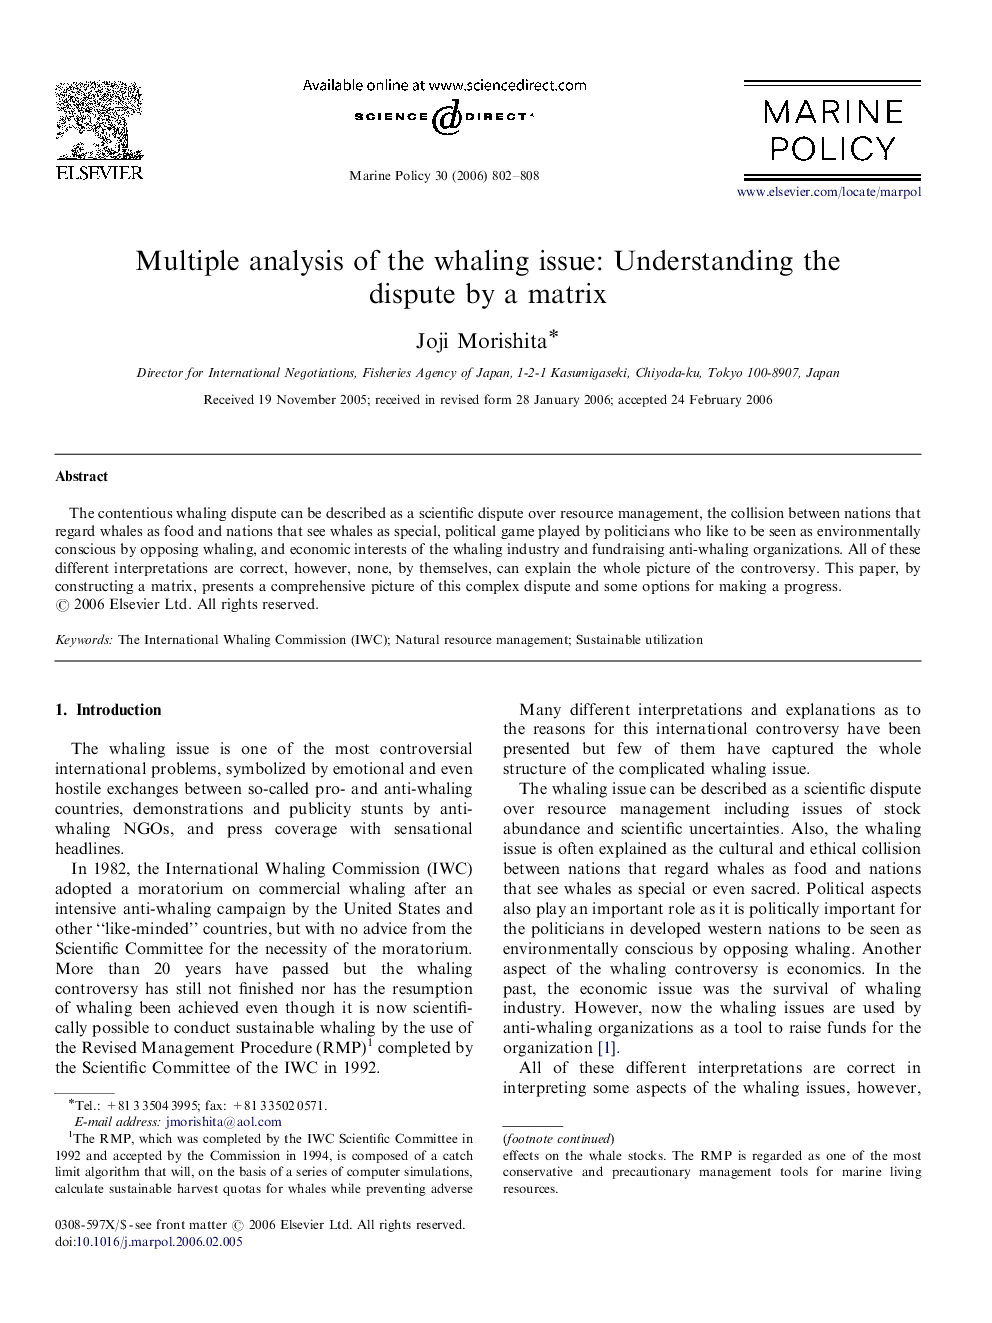 Multiple analysis of the whaling issue: Understanding the dispute by a matrix